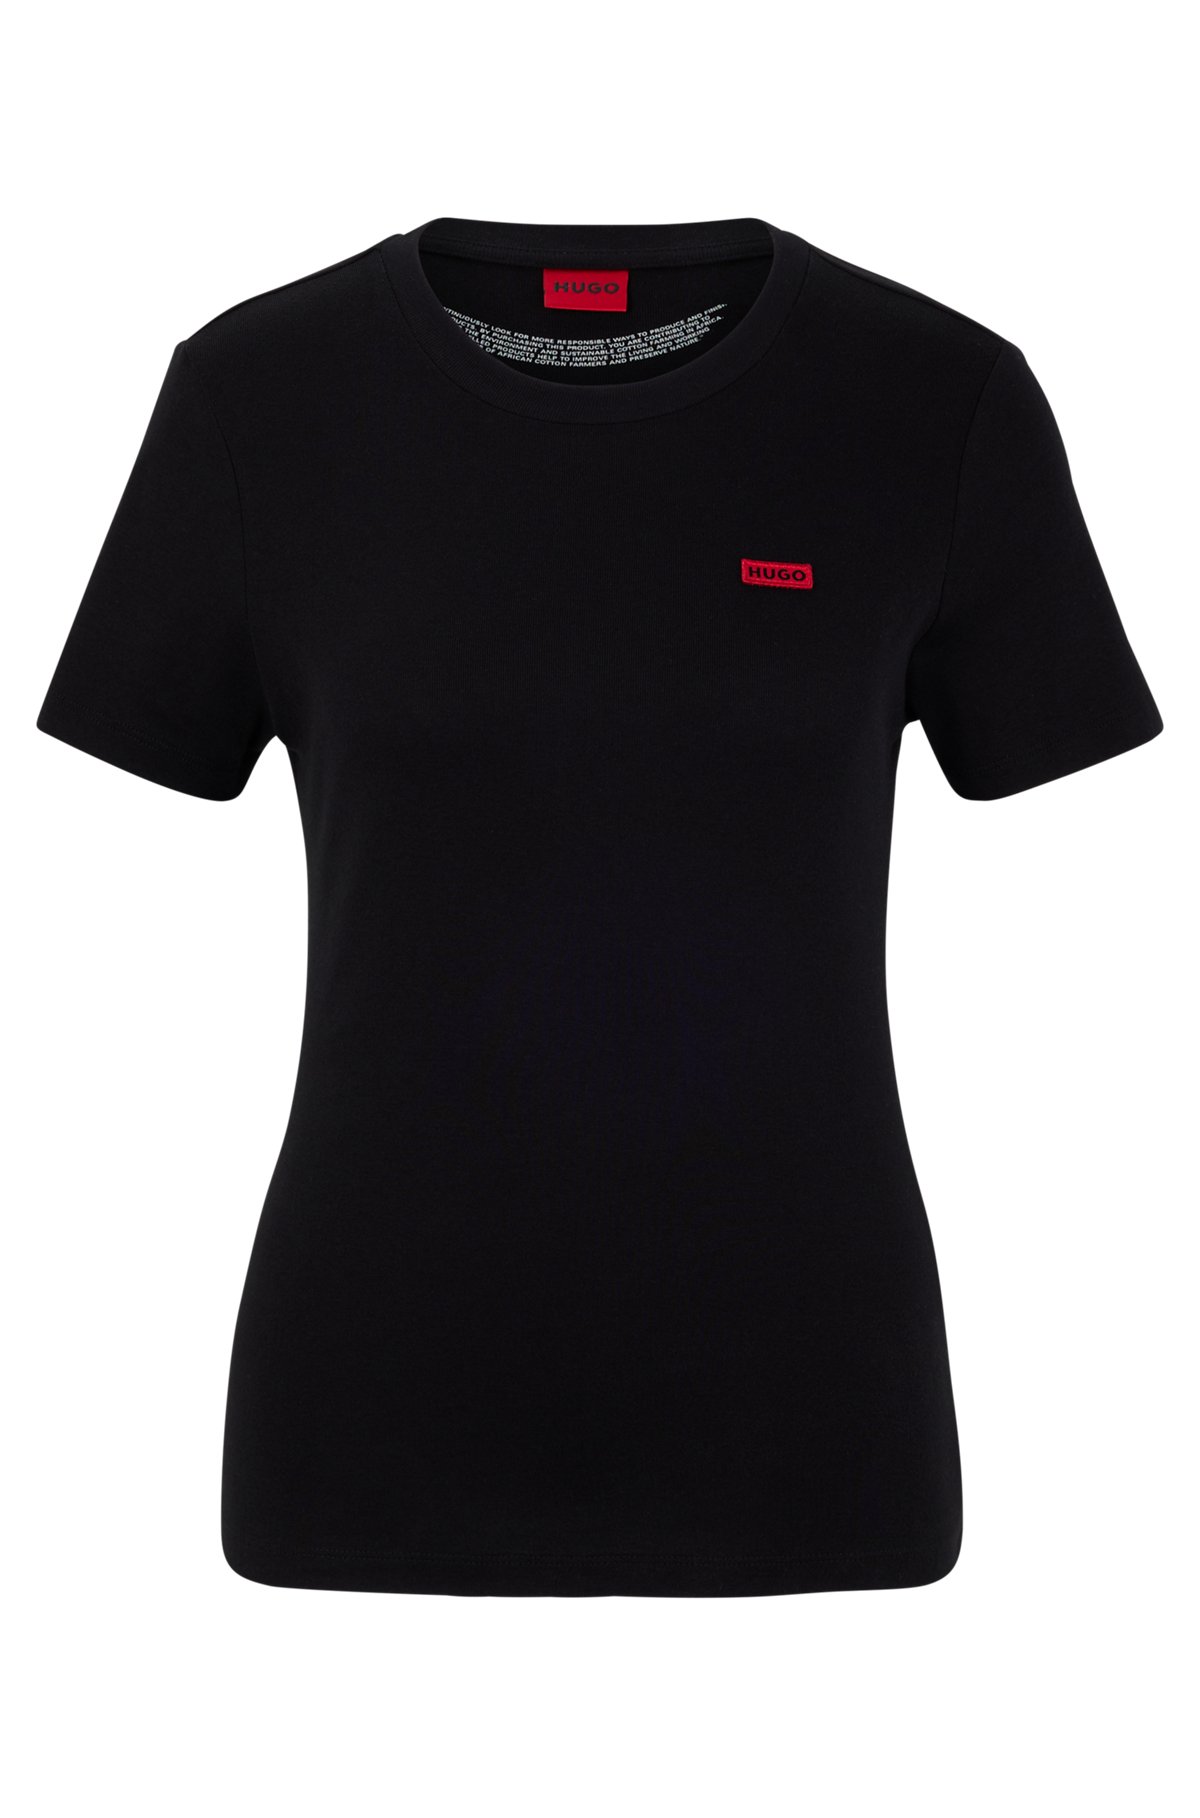 Crew-neck T-shirt in pure cotton with logo detail, Black